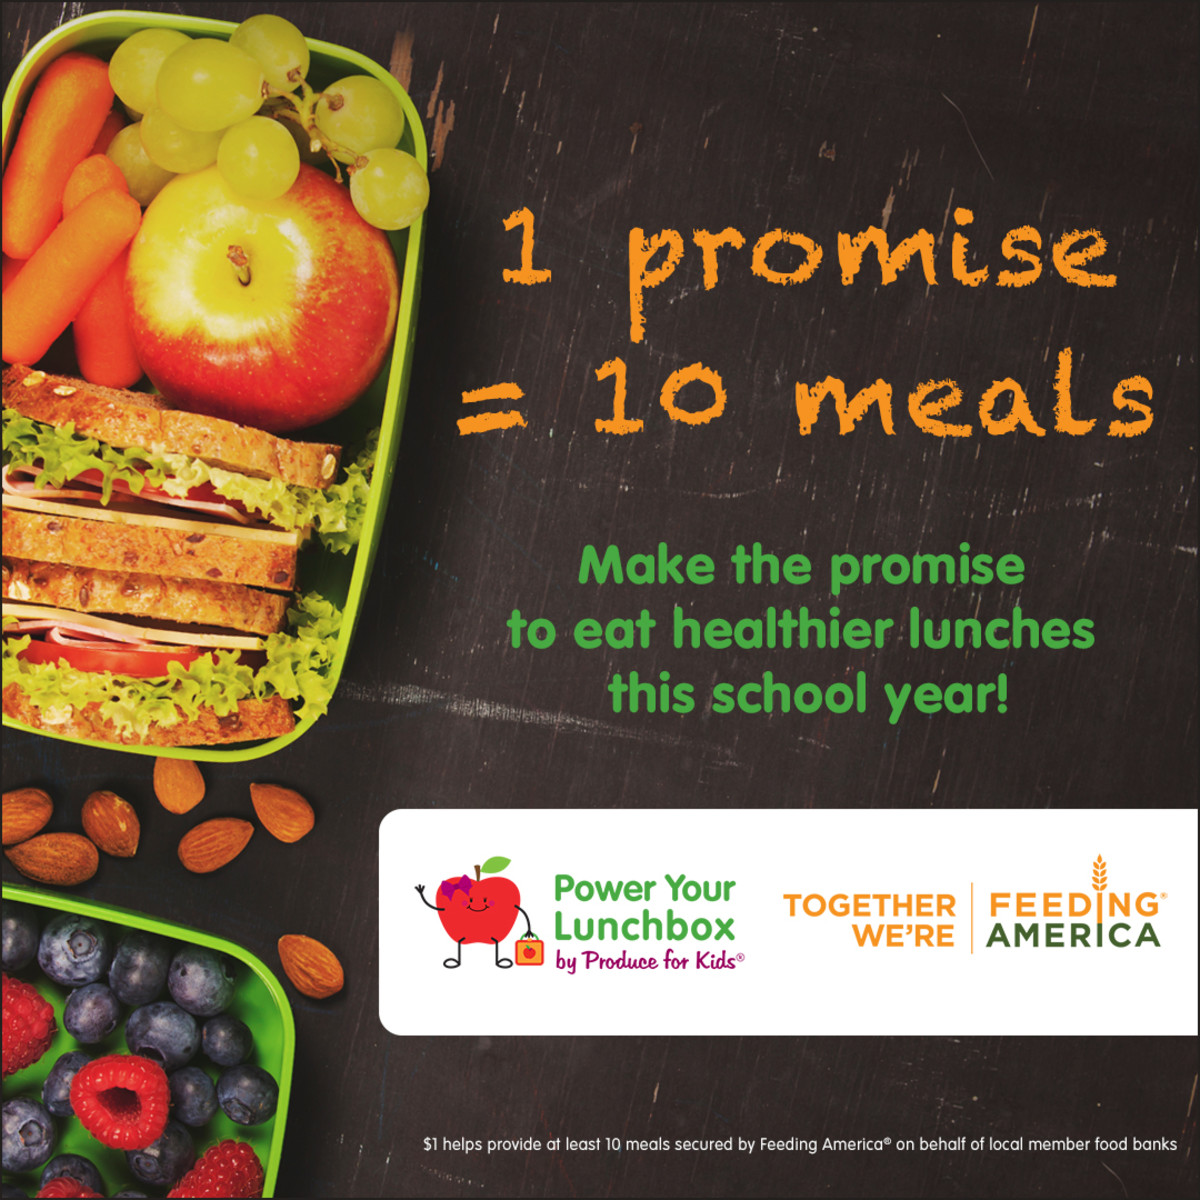 power your lunchbox, support families in need, food shortage, hungry kids, back to school, help feed children, produce for kids, kids healthy lunches, food banks, lunch for kids in need, helping children in need